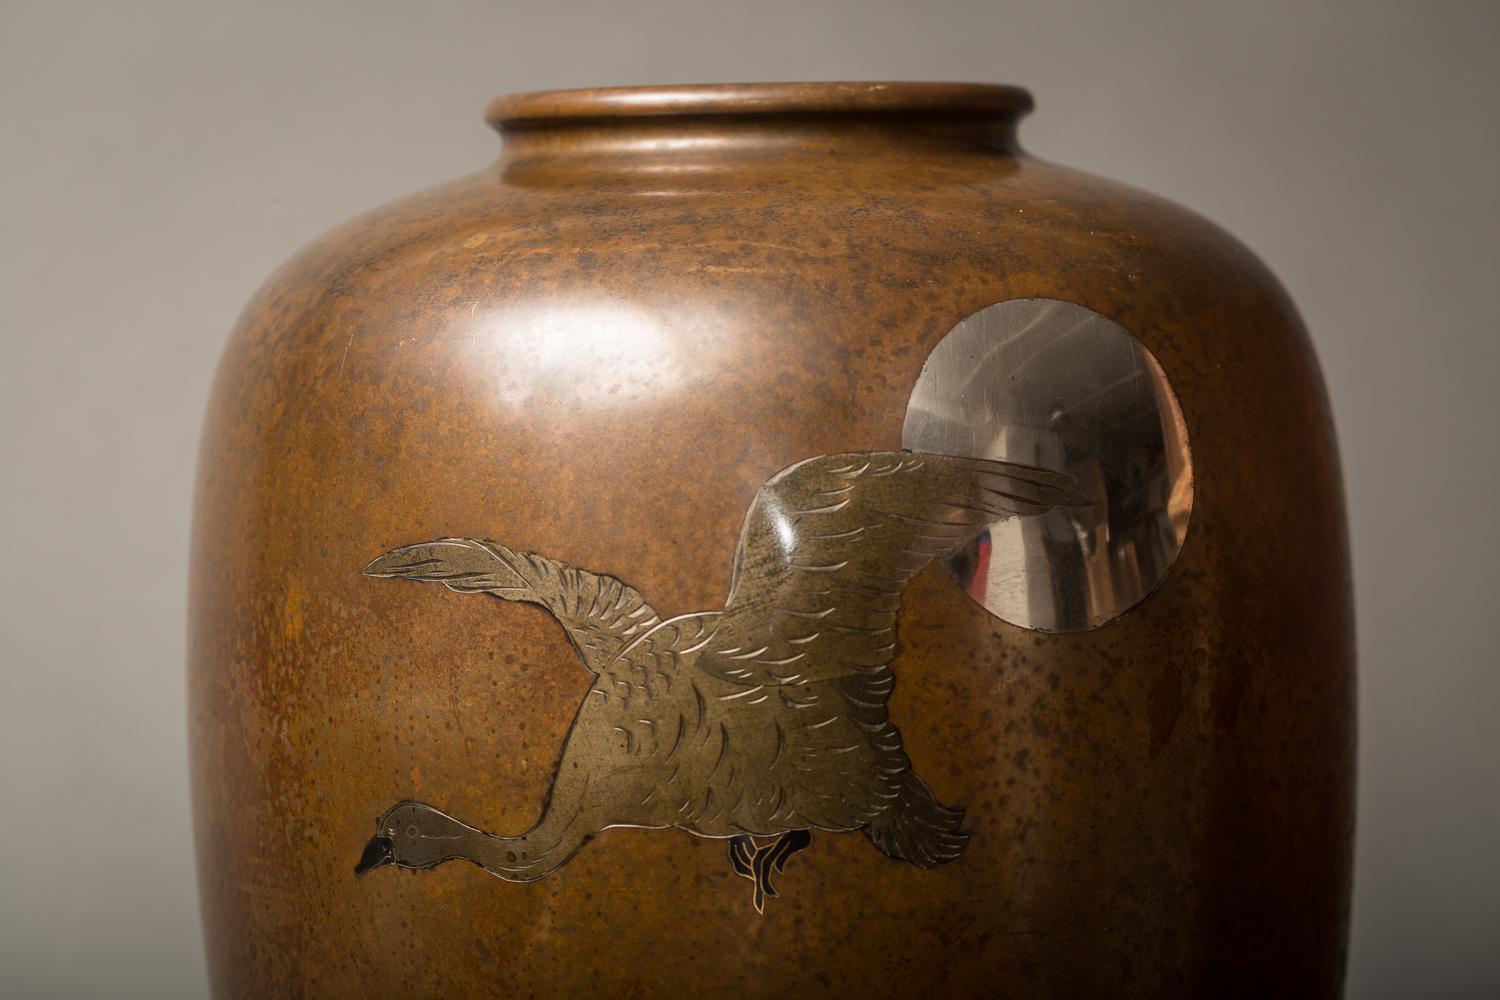 Japanese Meiji bronze Takaoka vase with waterfowl and moon design
Meiji period (1868-1912) bronze vase from Takaoka, in Toyama prefecture, is a city historically known for its metal work. Vase has silver inlay moon and waterfowl, signature on the